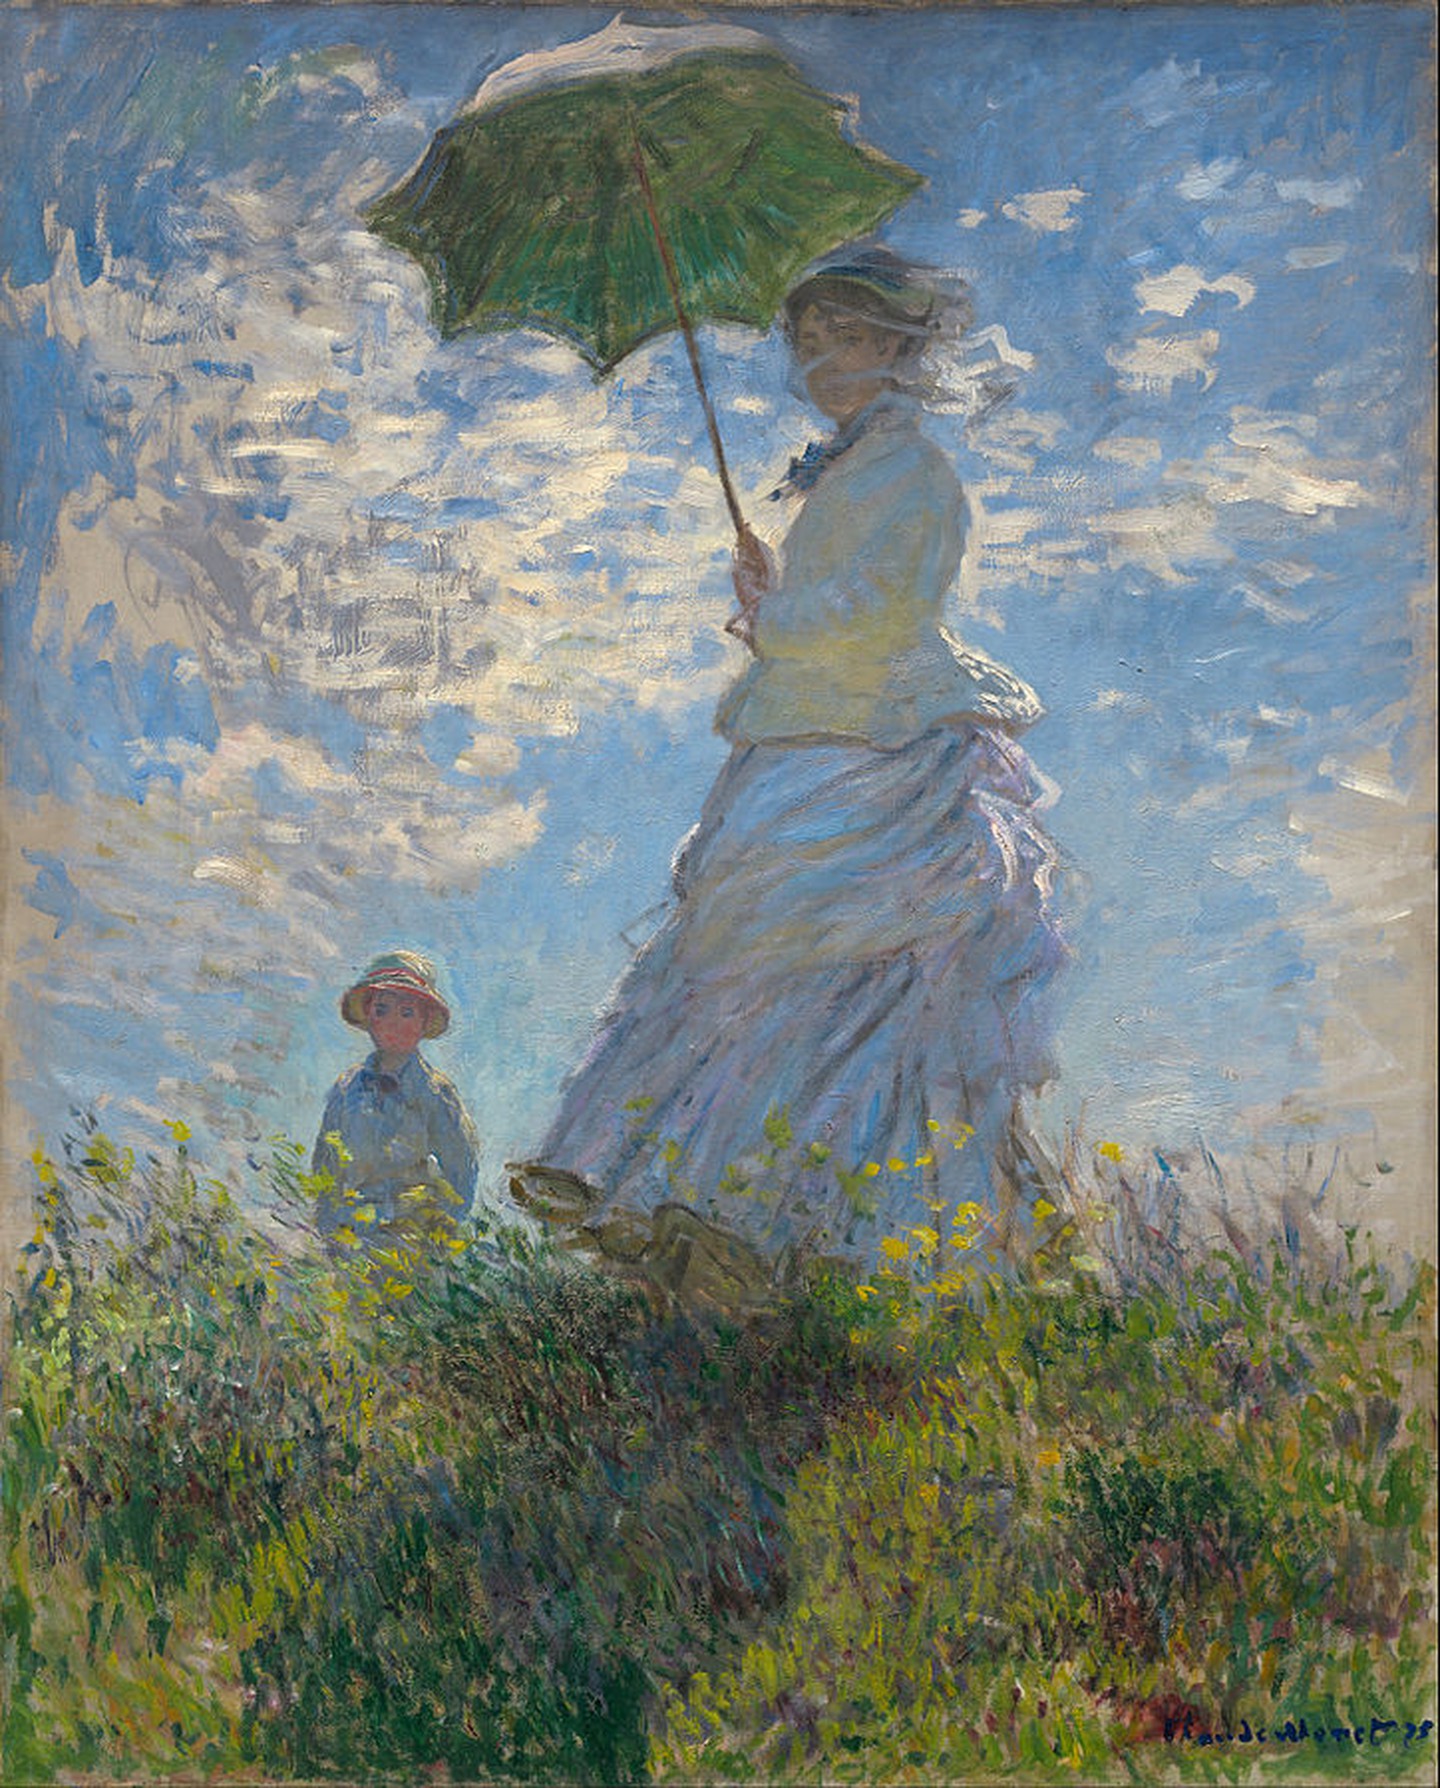 724px-Claude_Monet_-_Woman_with_a_Parasol_-_Madame_Monet_and_Her_Son_-_Google_Art_Project